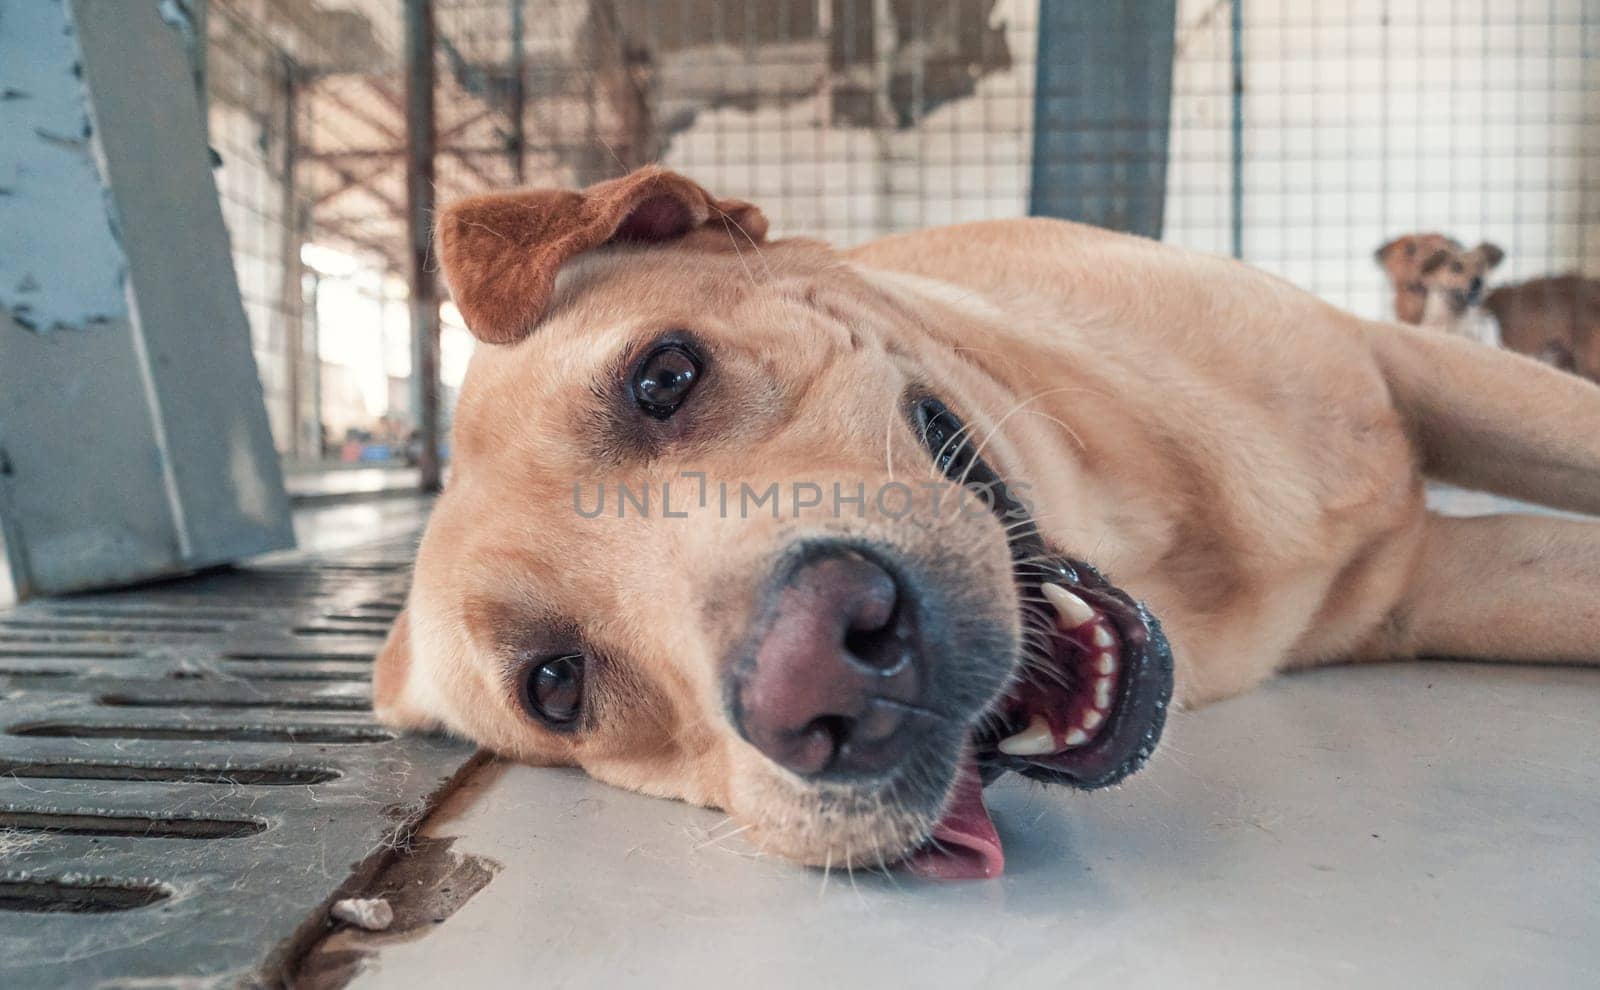 Labrador dog in shelter waiting to be rescued and adopted to new home. Shelter for animals concept by Busker